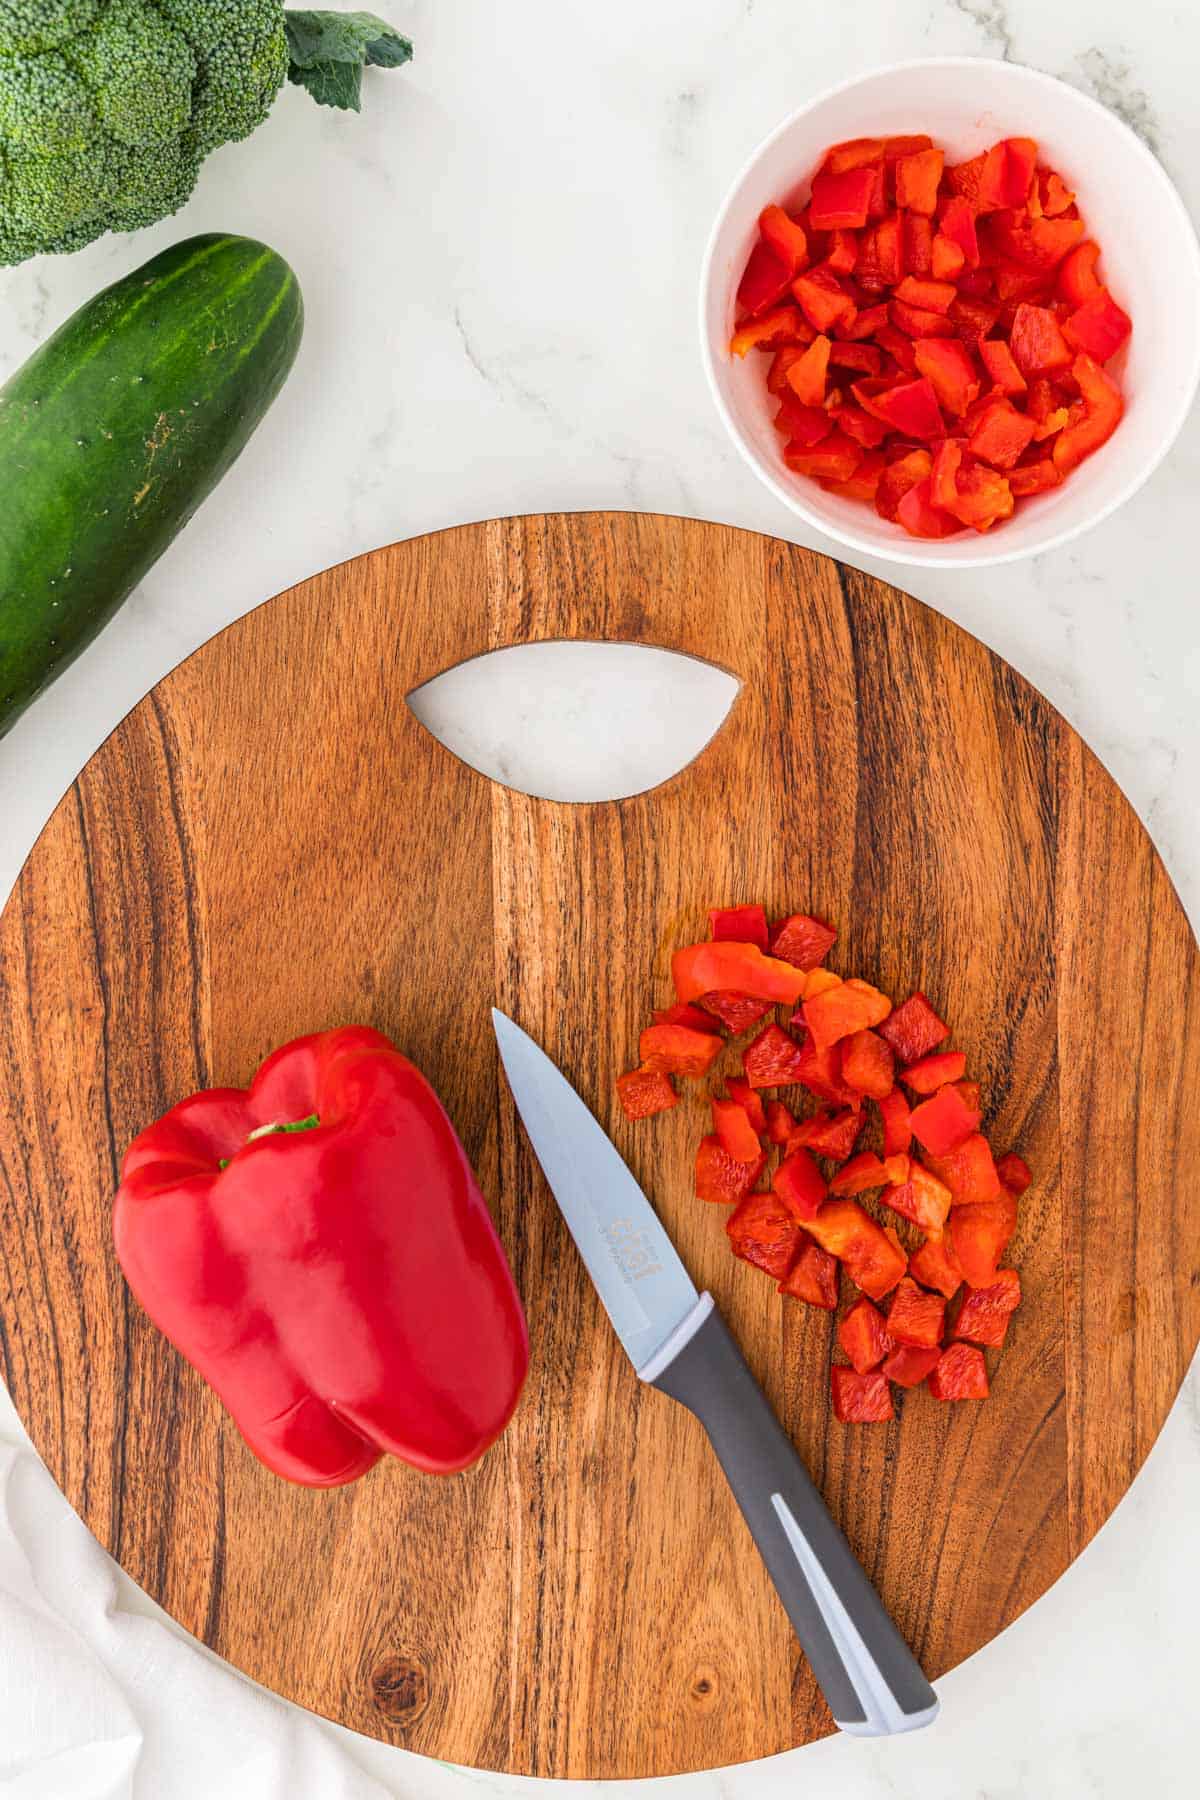 dicing up a red bell pepper